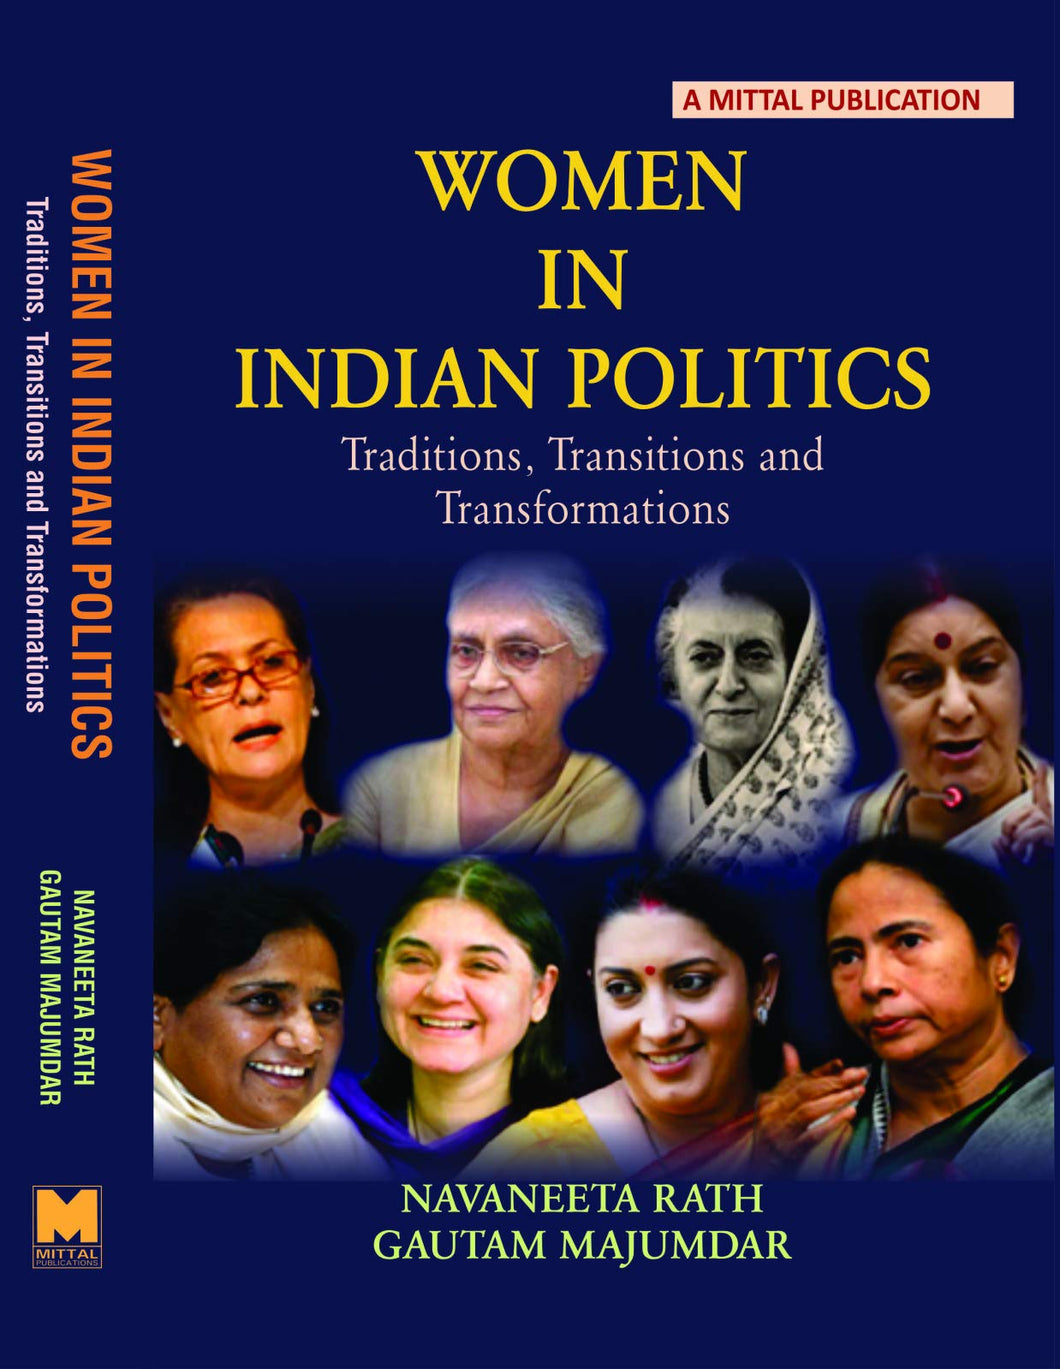 Women in Indian Politics–Traditions, Transitions and Transformations